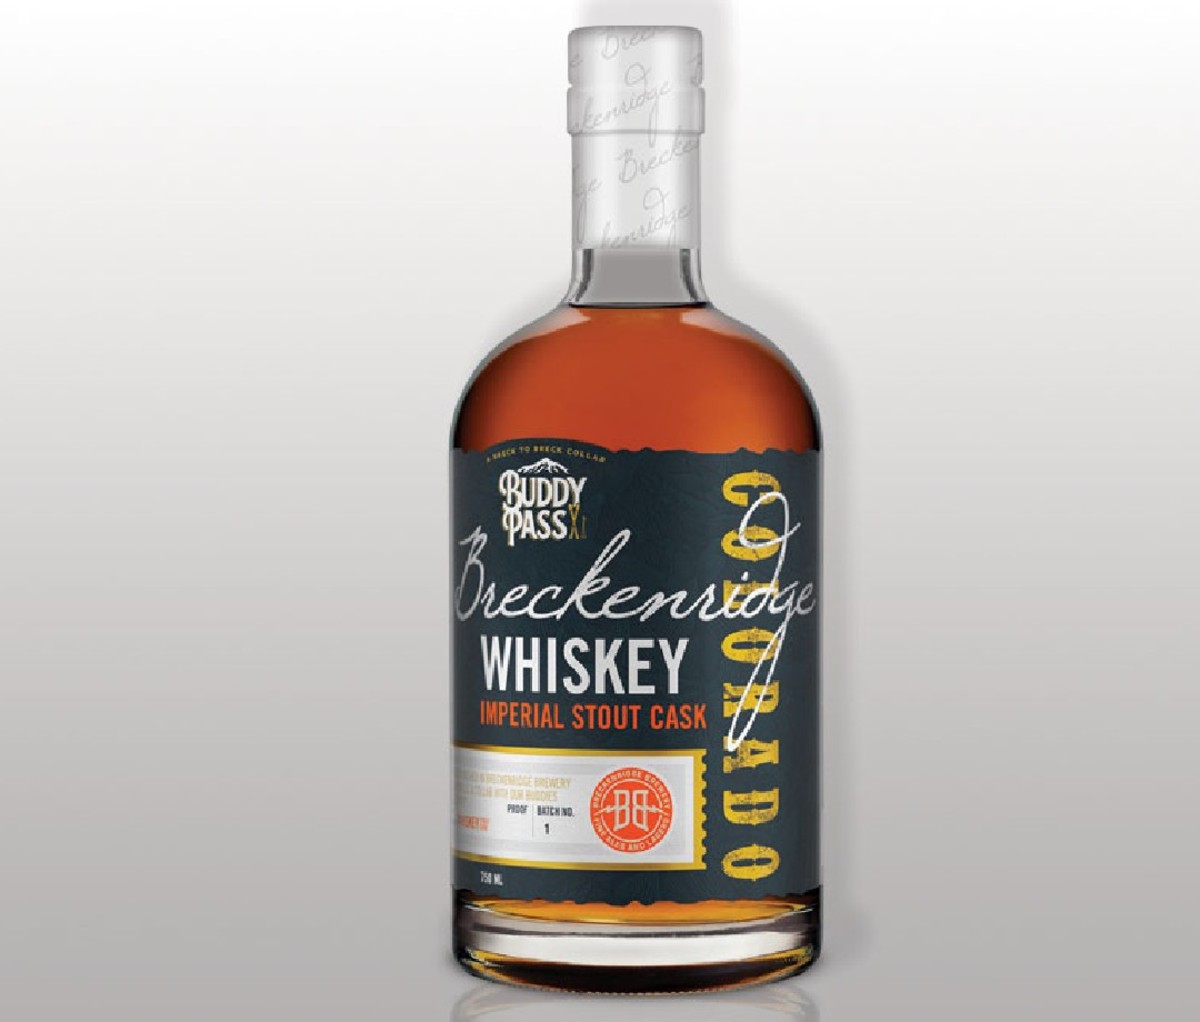 Bottle of Buddy Pass Imperial Stout Cask Whiskey, Breckenridge Distillery